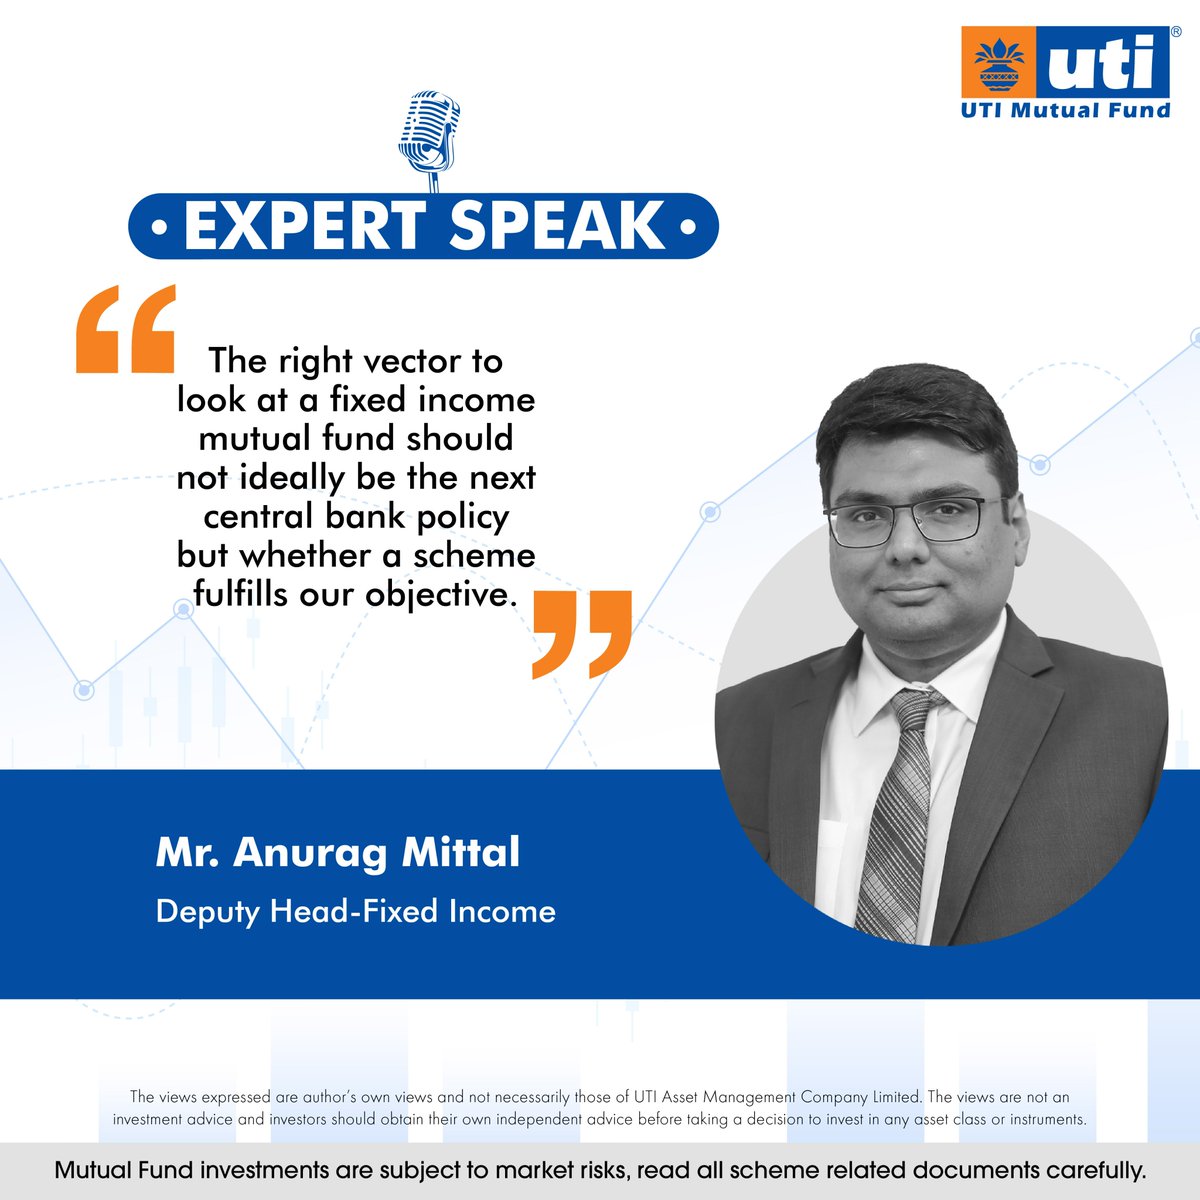 Mr. Anurag Mittal, Deputy Head - Fixed Income, talks about how to develop a framework for fixed income allocation: bit.ly/40c7vGD 

#ExpertSpeak #UTIMutualFund #FixedIncome #MutualFunds